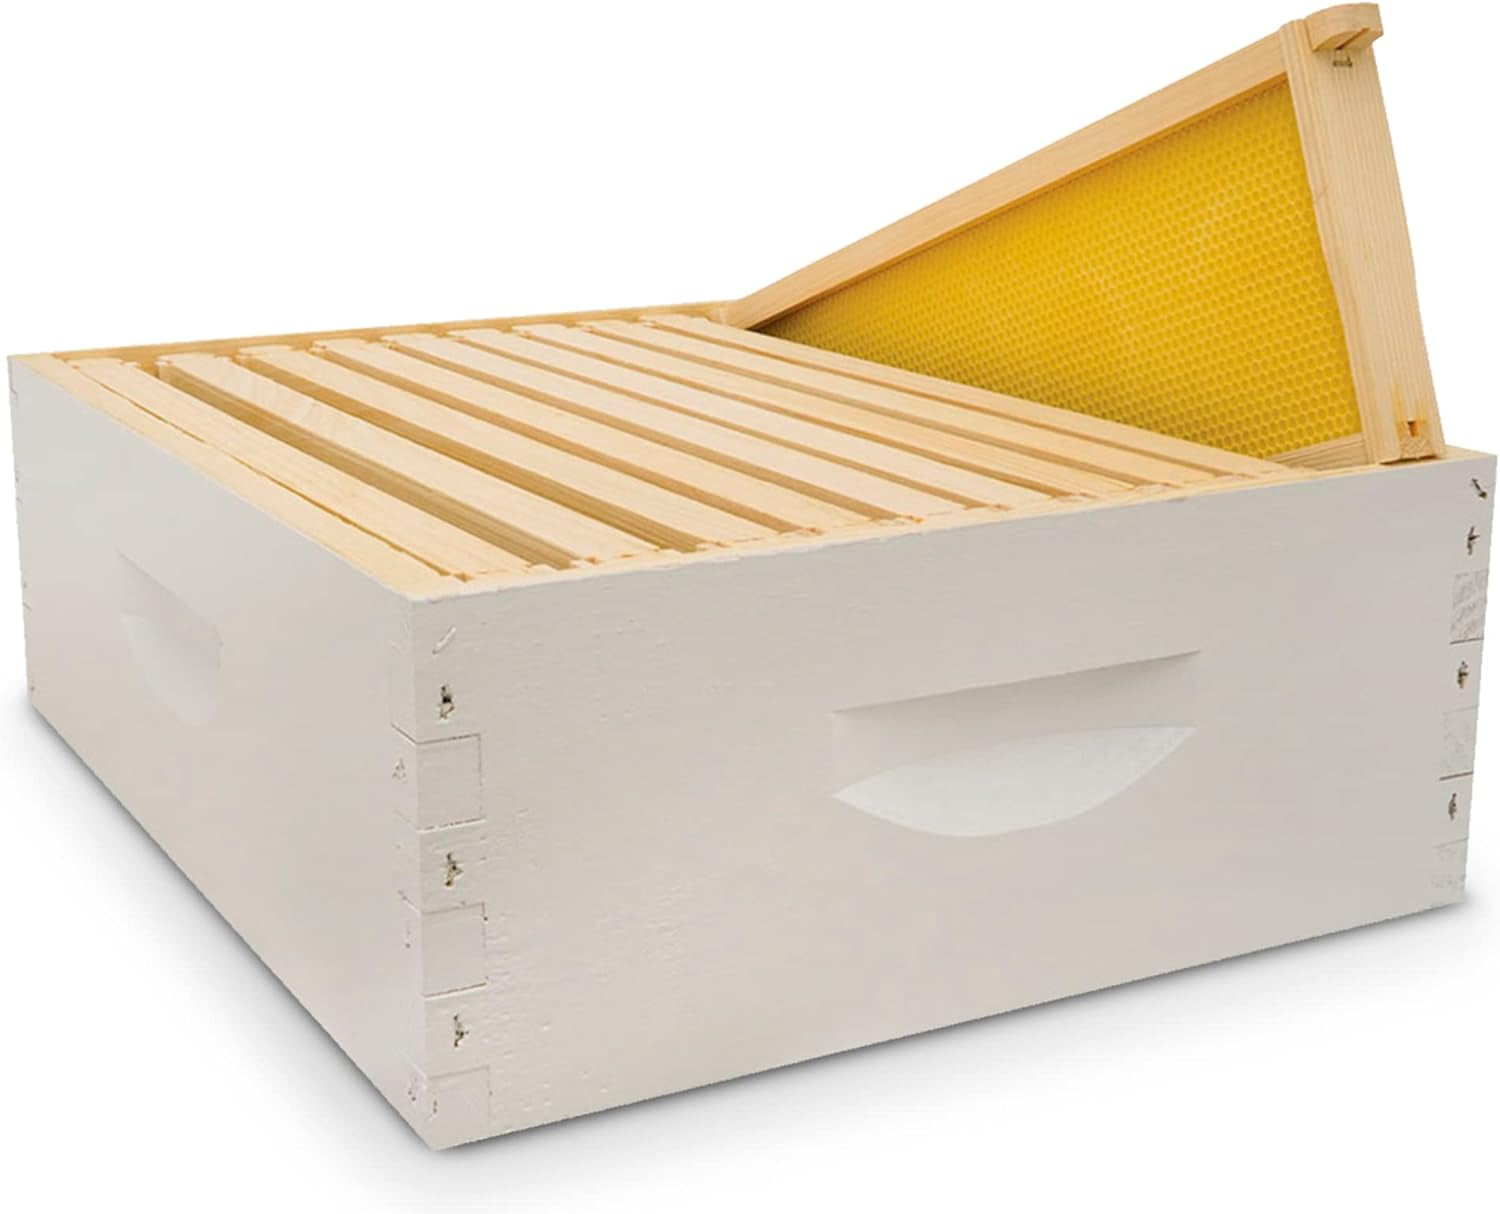 Hive Body Bundle, Assembled, 10-Frame, Painted, Beekeeping, Bee Box, Beekeeping Supplies, Harvest Honey, Includes 10 Assembled Frames W/Plastic Coated Foundation